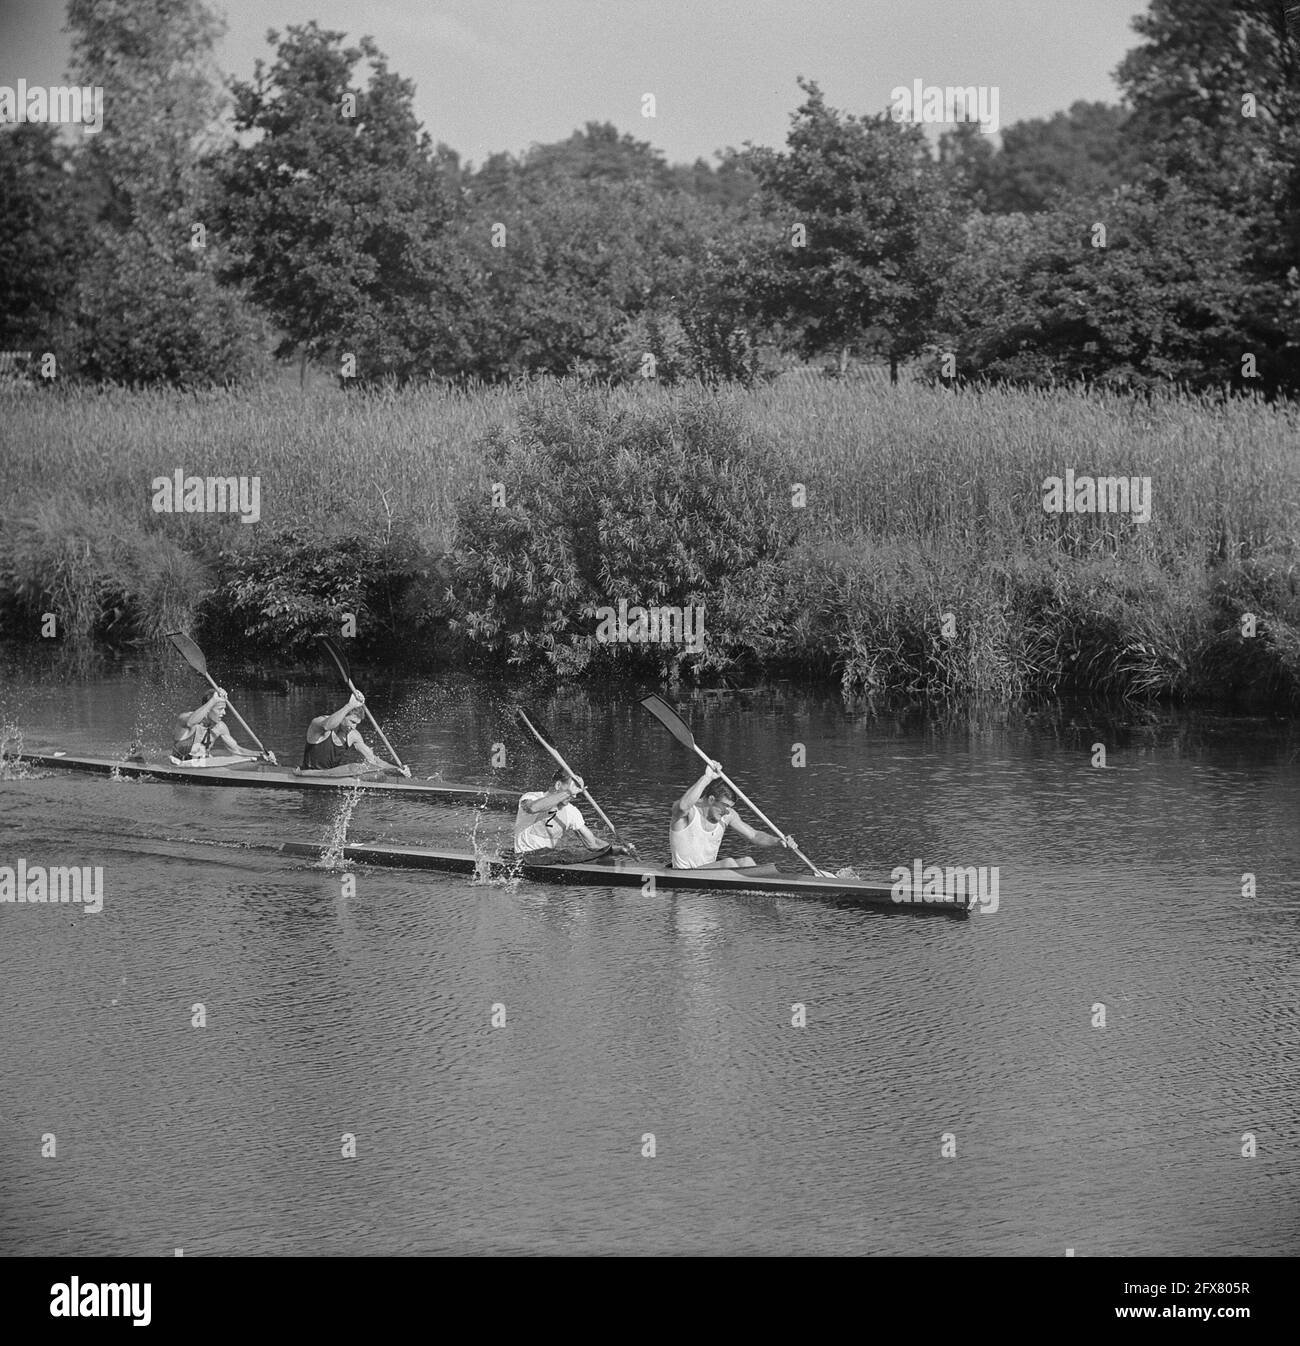 Championship of the Netherlands Canoe 10,000m Men on Twenthe Canal at Eefde. Lagrand, Kracht, Baan, van der Ster, Weyzen, Knuppe, Leeuwerik and Beunder, June 29, 1963, Championships, canoers, The Netherlands, 20th century press agency photo, news to remember, documentary, historic photography 1945-1990, visual stories, human history of the Twentieth Century, capturing moments in time Stock Photo